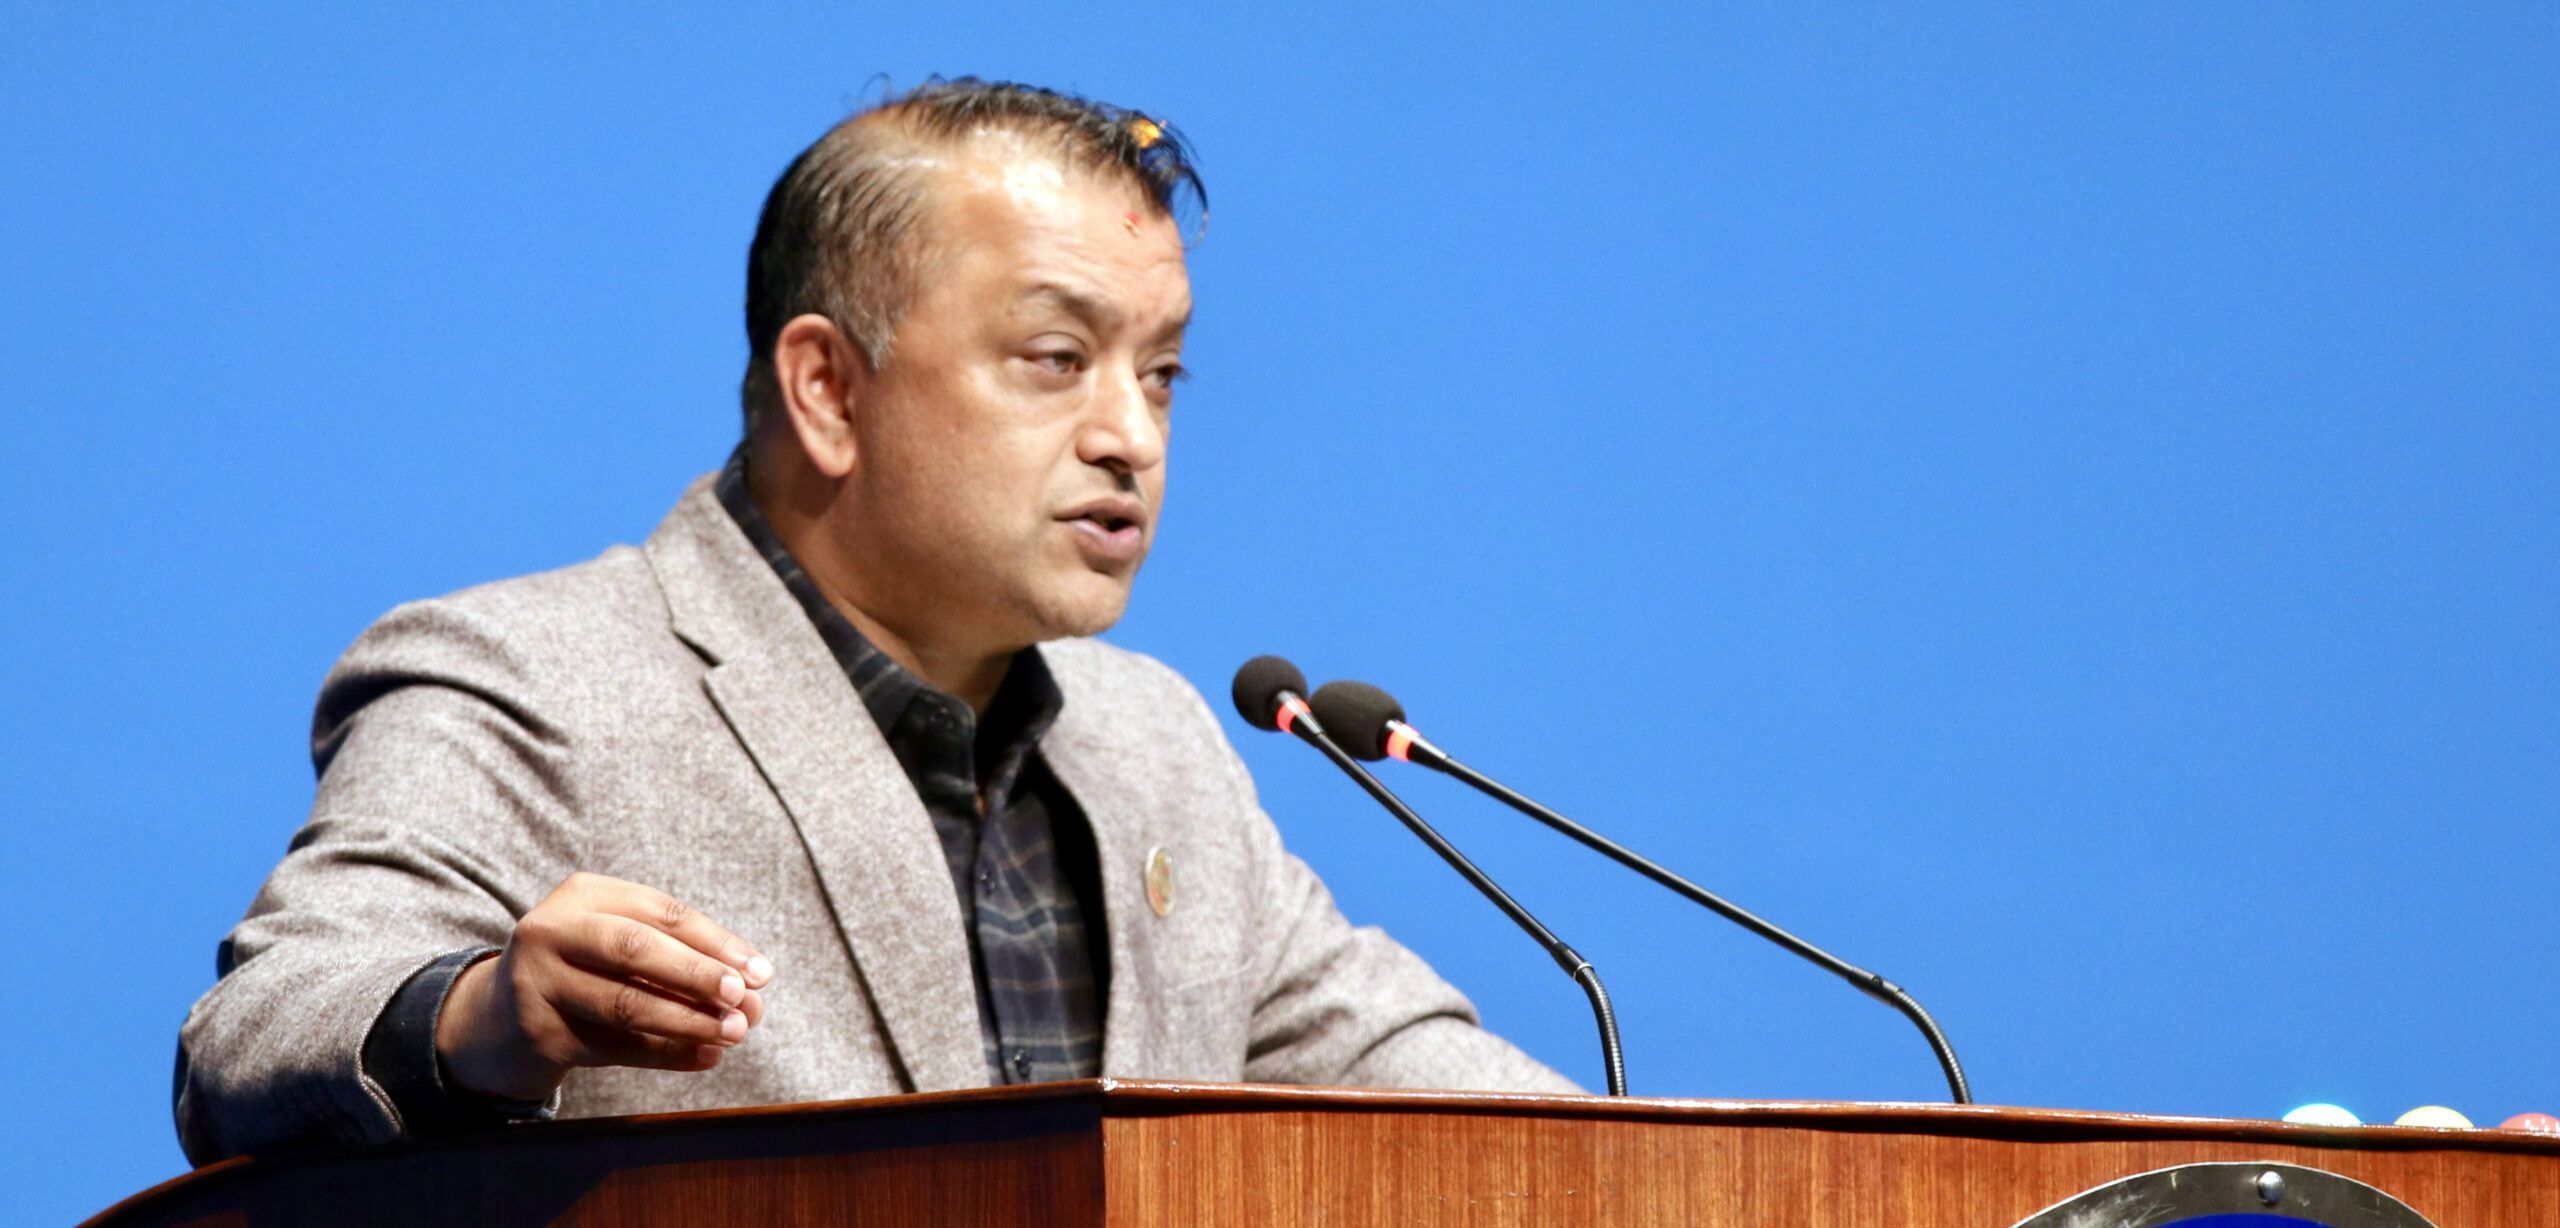 Gagan Thapa demands accountability: No leniency for those involved in public land encroachment, citizenship forgery, or cooperative fraud